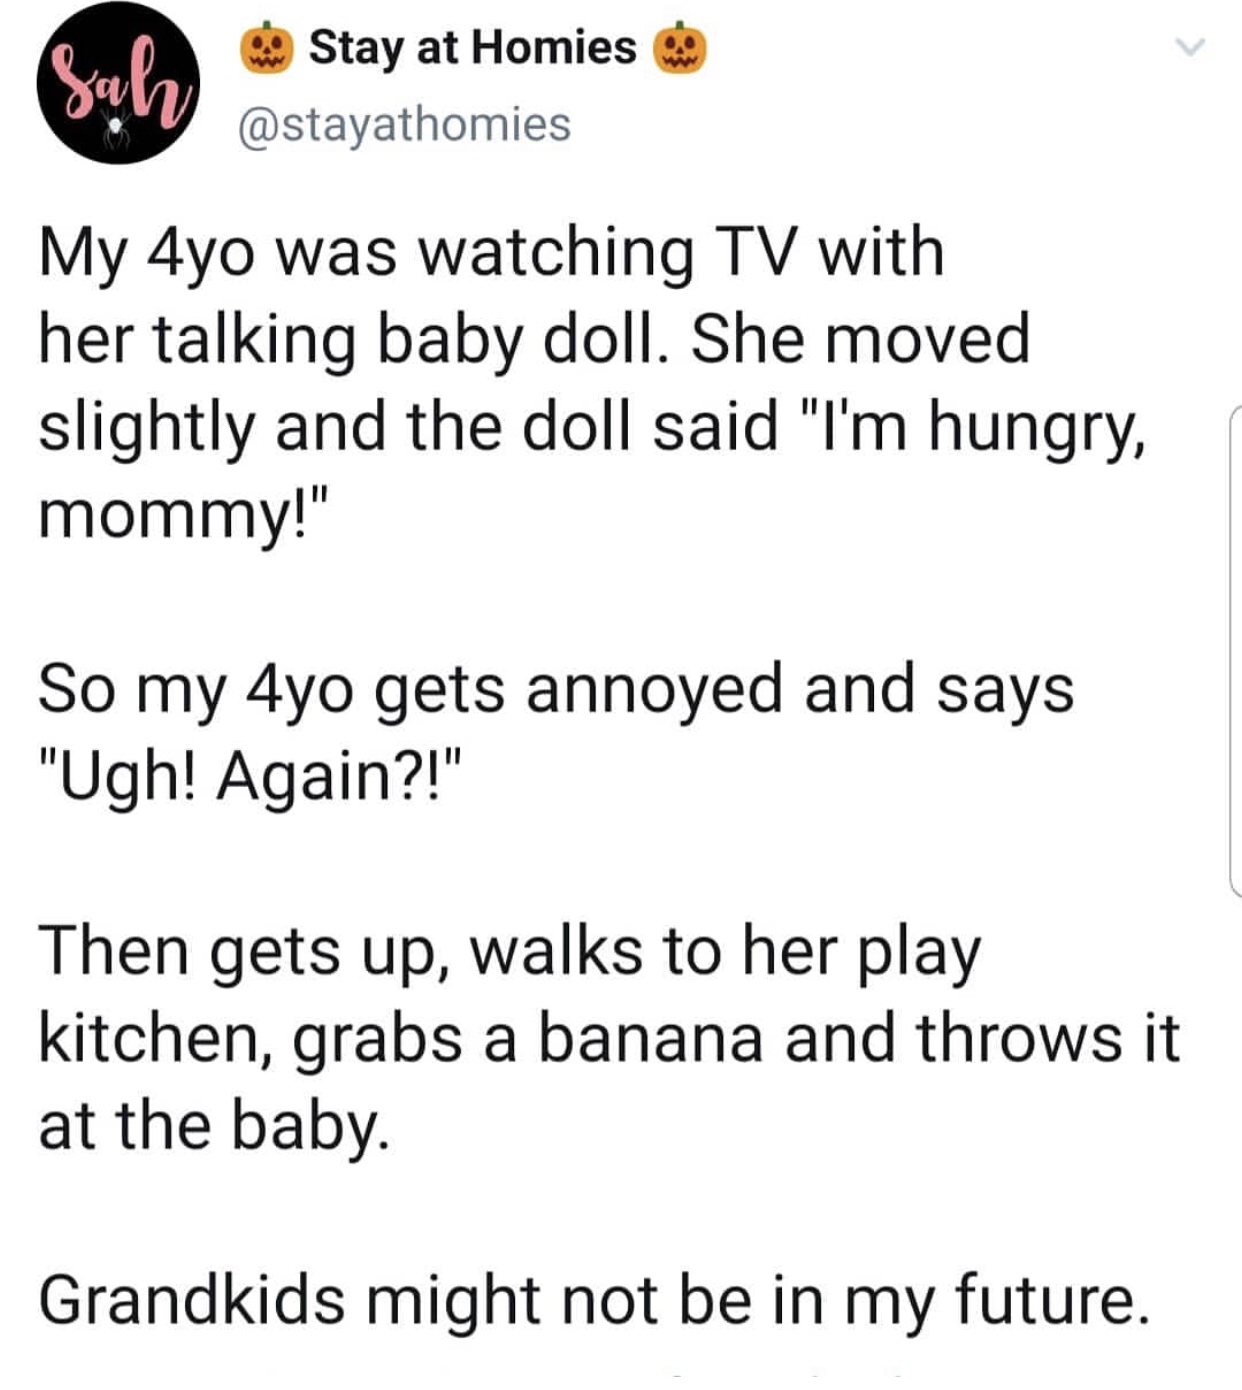 angle - Stay at Homiese My 4yo was watching Tv with her talking baby doll. She moved slightly and the doll said "I'm hungry, mommy!" So my 4yo gets annoyed and says "Ugh! Again?!" Then gets up, walks to her play kitchen, grabs a banana and throws it at th